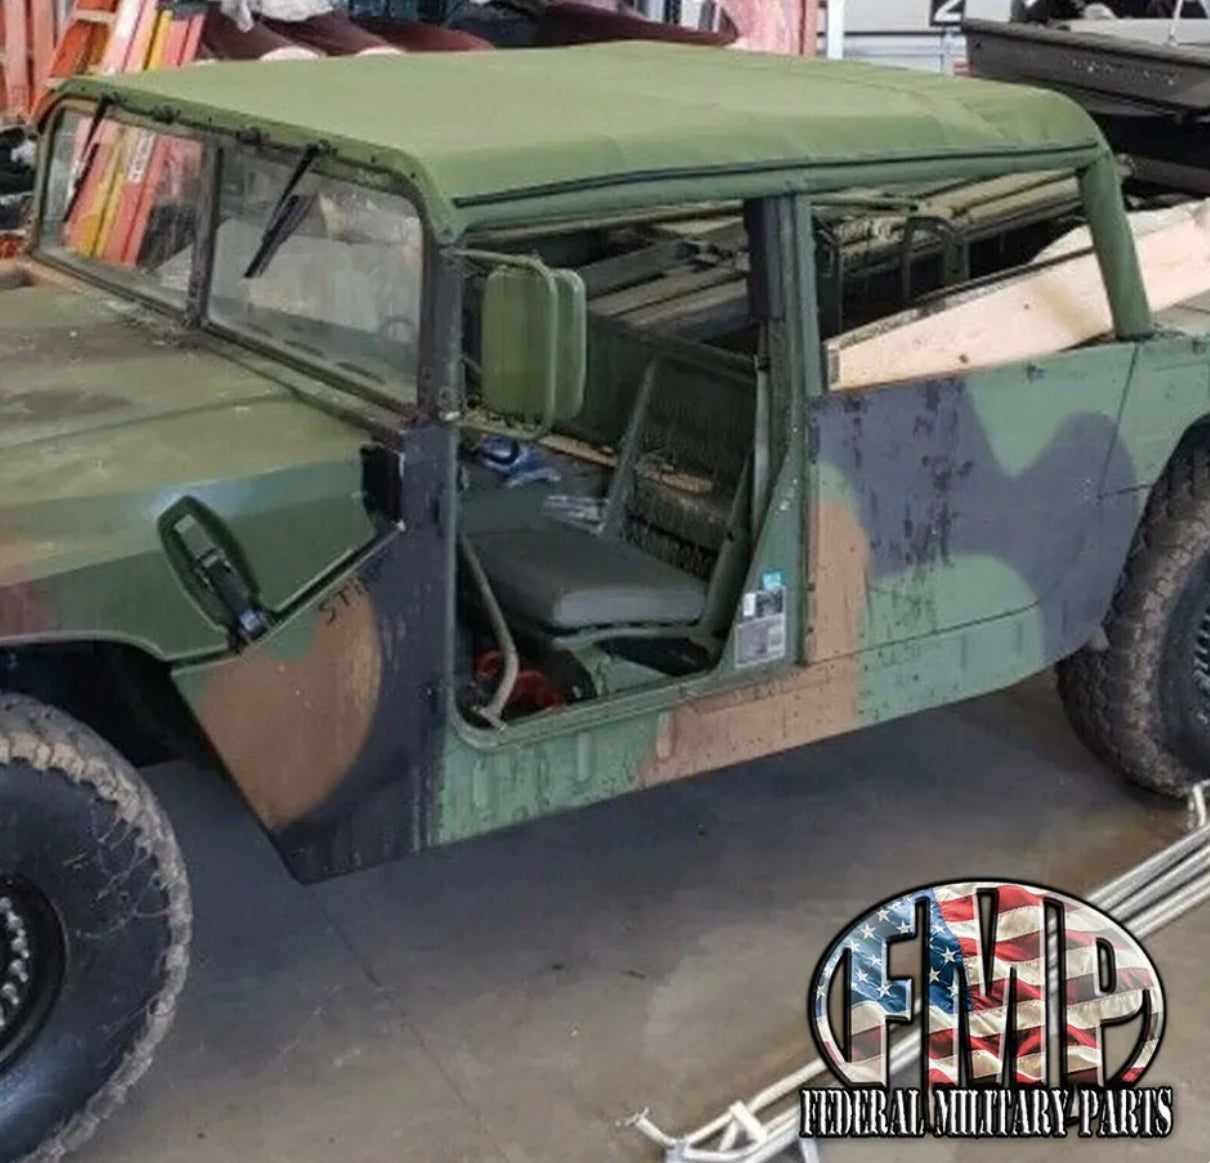 Removable Canvas Soft Top for Military Humvee 4-door in Black, Tan or Green